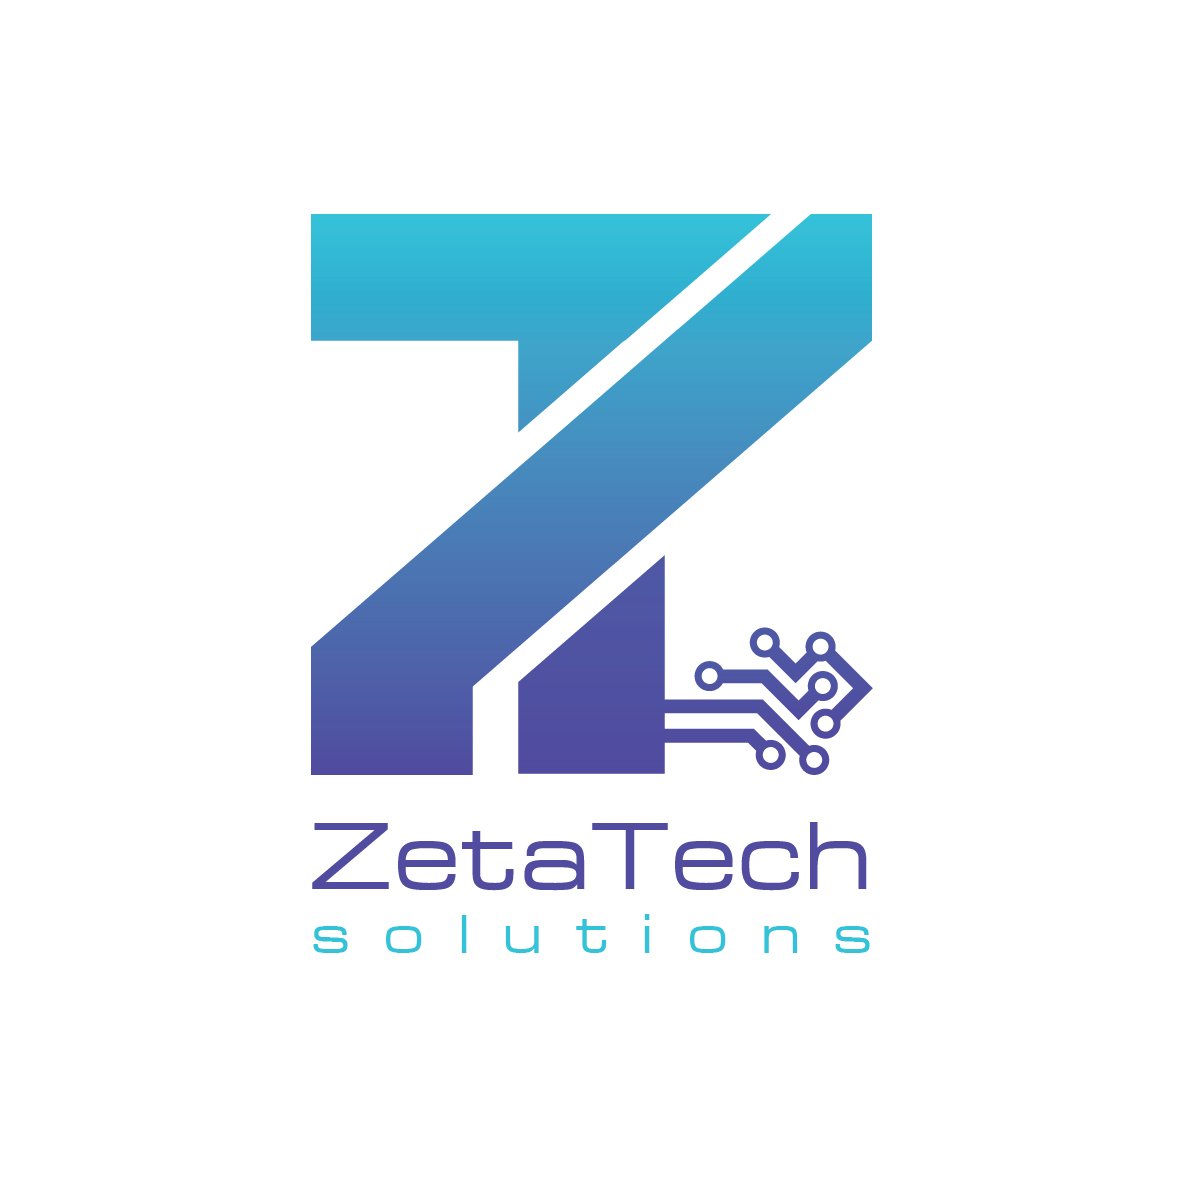 ZetaTech is dedicated to develop high quality mobile and web applications at very competitive prices, with a portfolio that includes applications in healthcare.